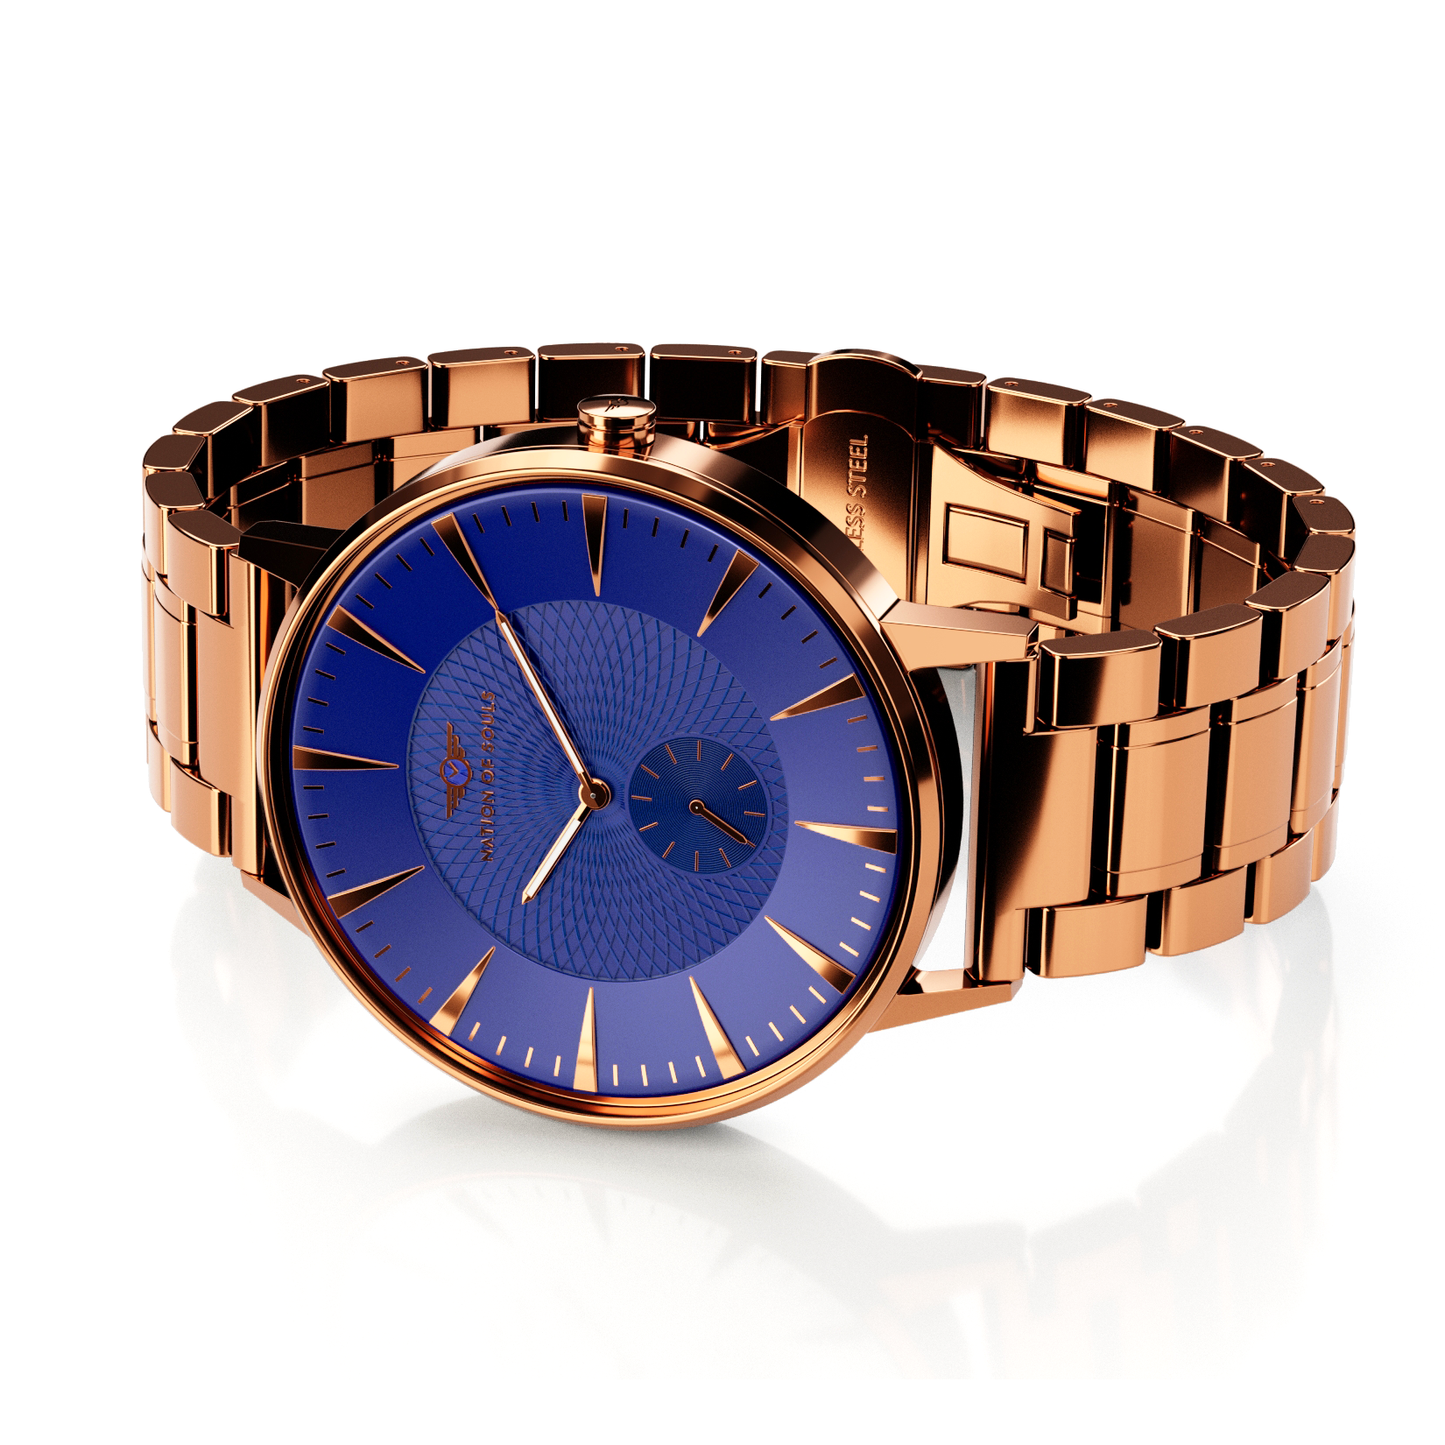 Eclipse Men's Watch from Nation of Souls - Rose Gold/Blue Dial